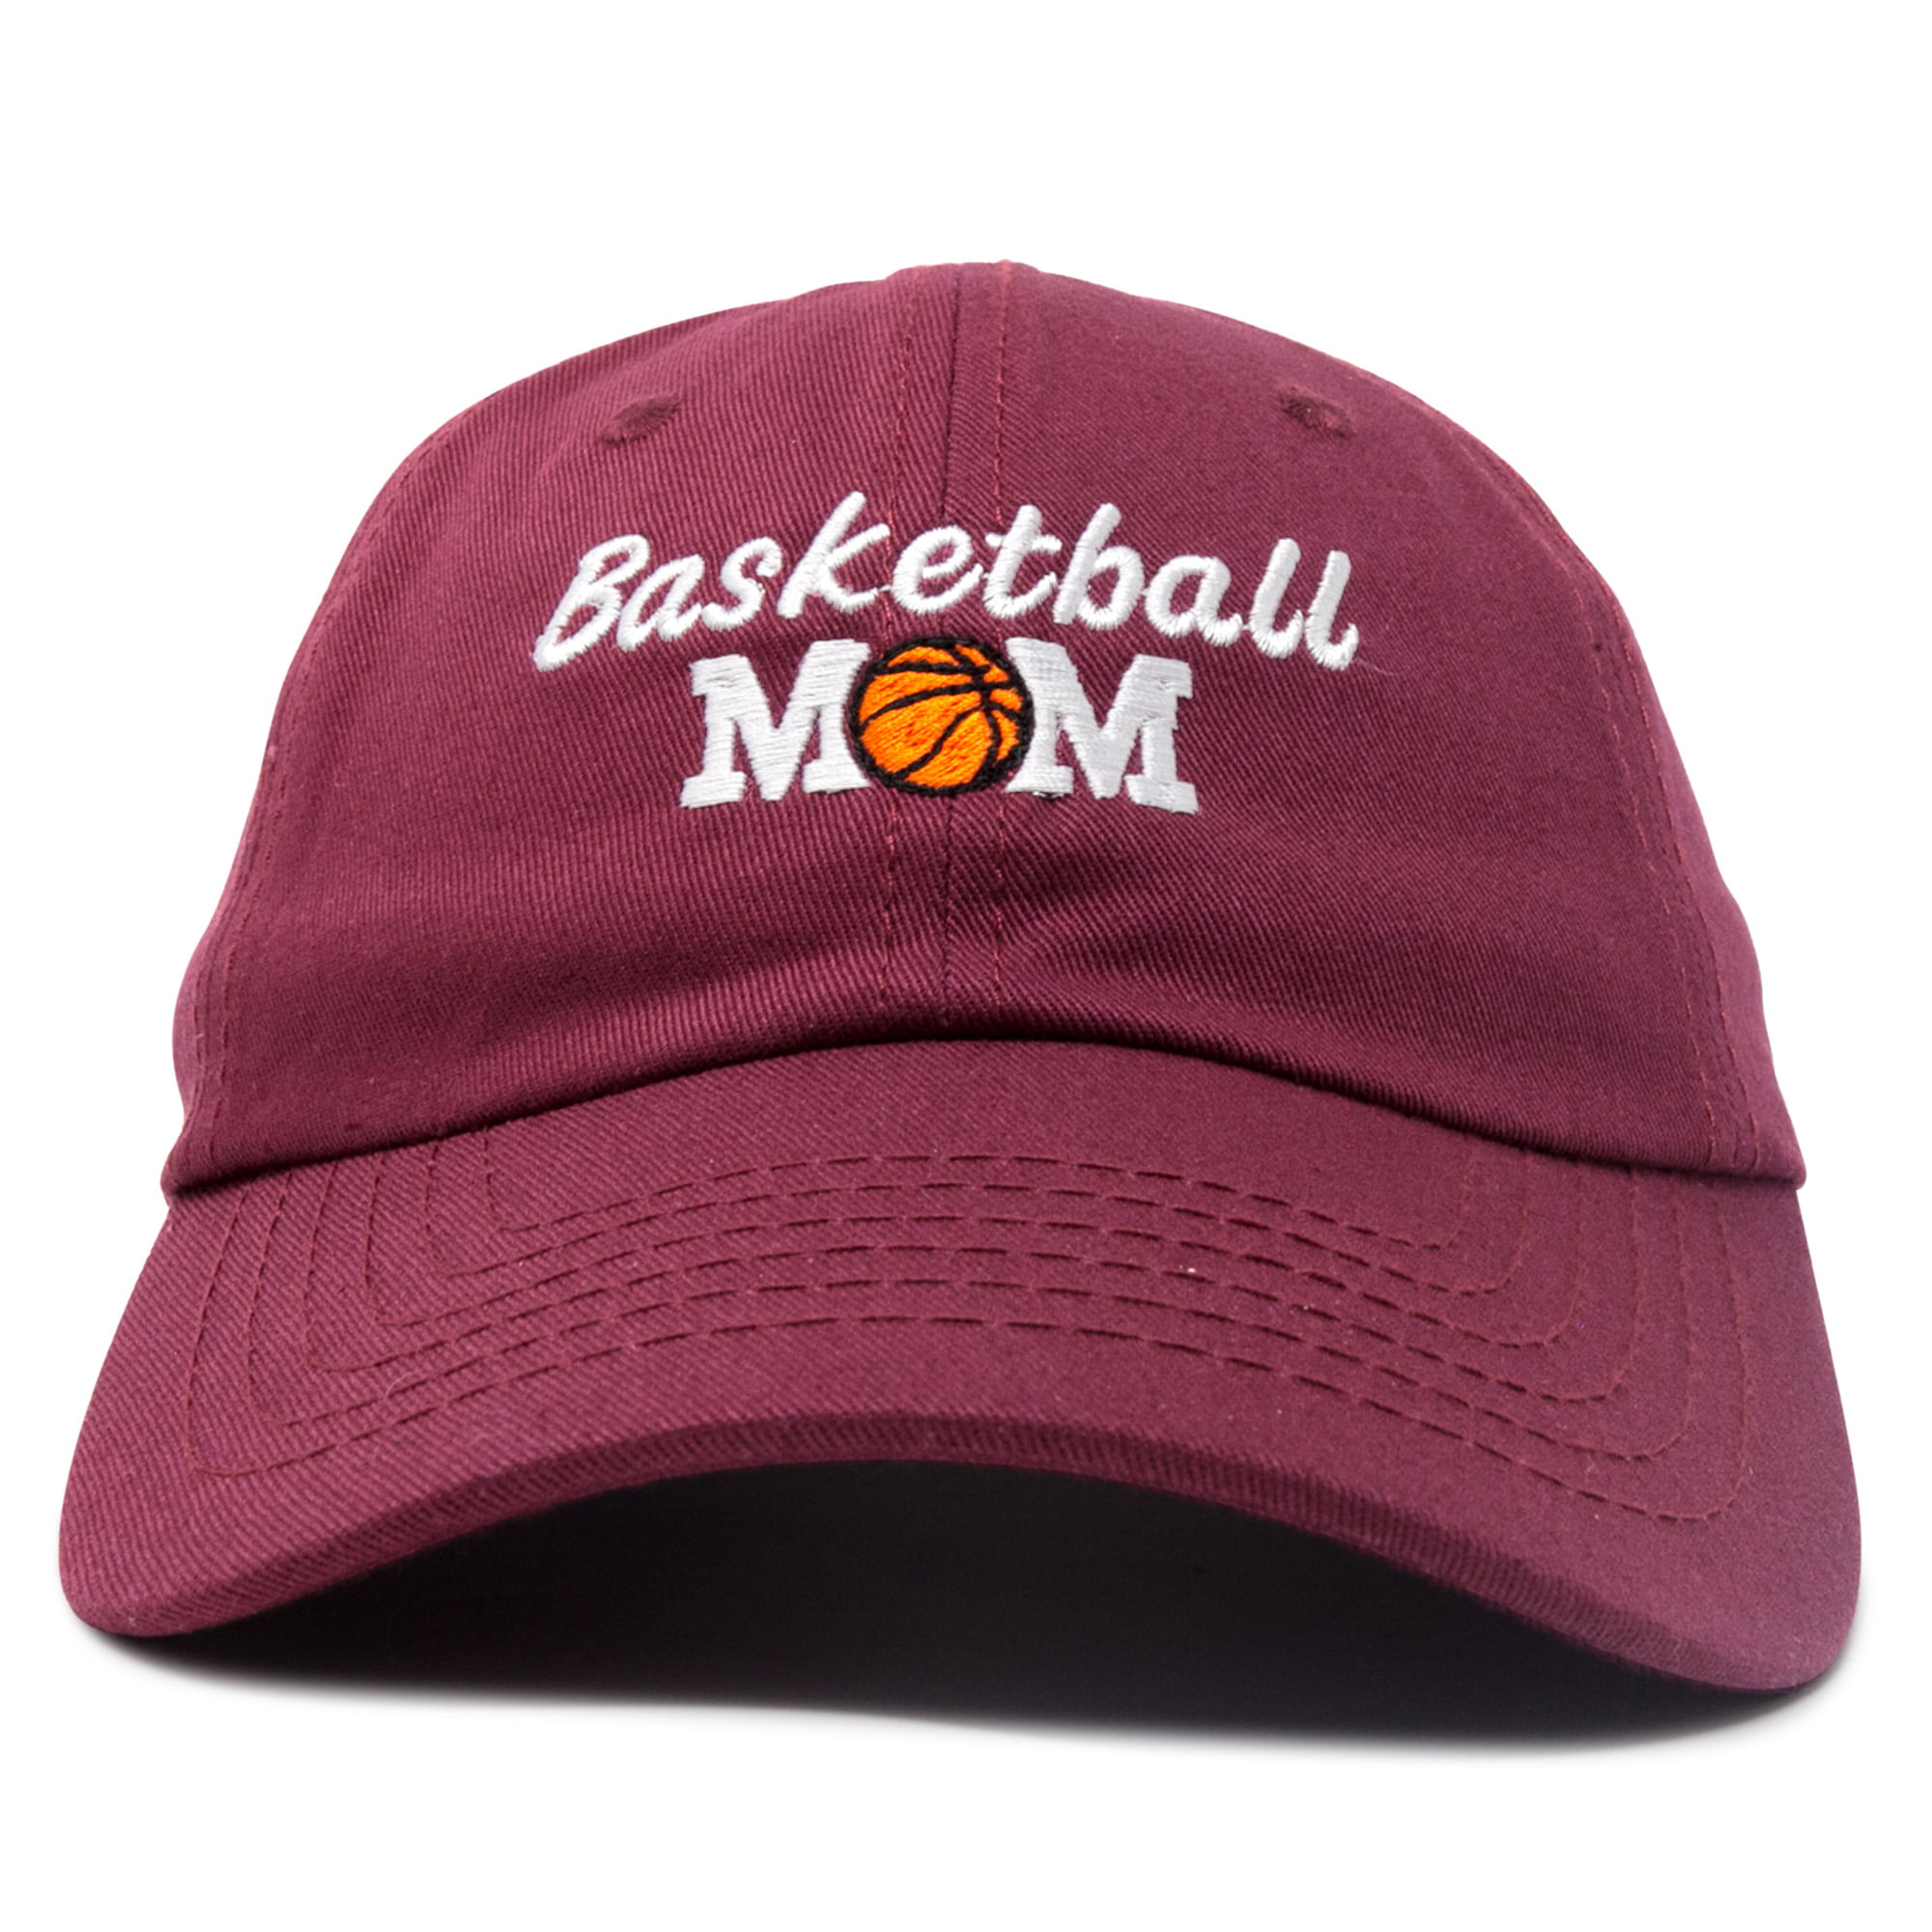 DALIX Basketball Mom Hat and Caps for Women in Maroon